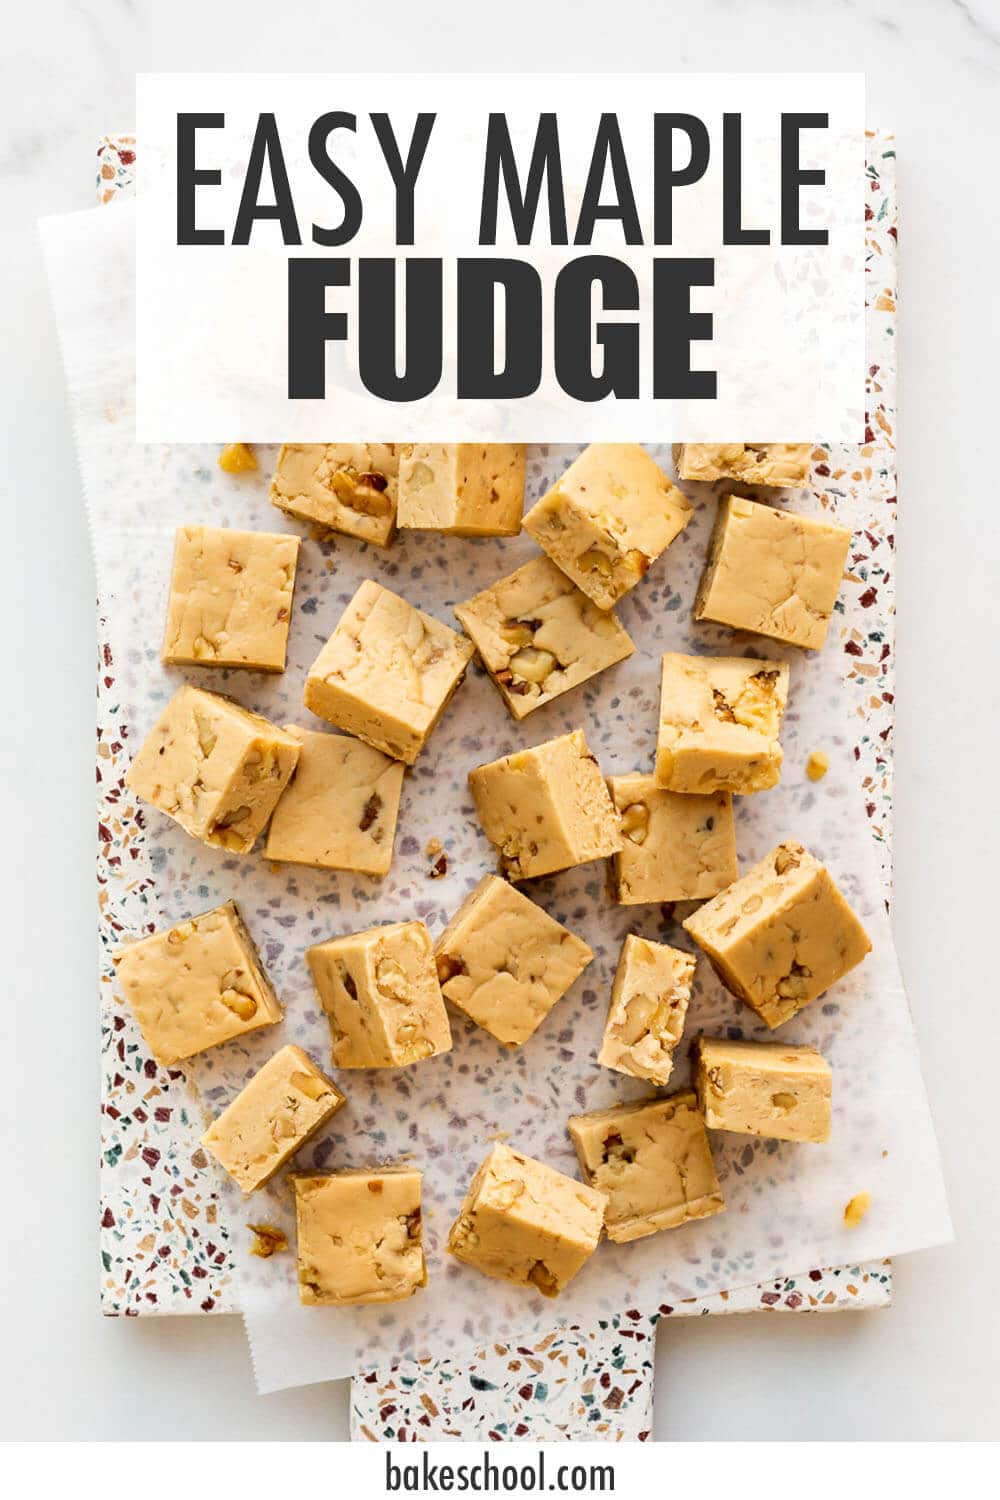 Squares of maple fudge with walnuts on a platter.